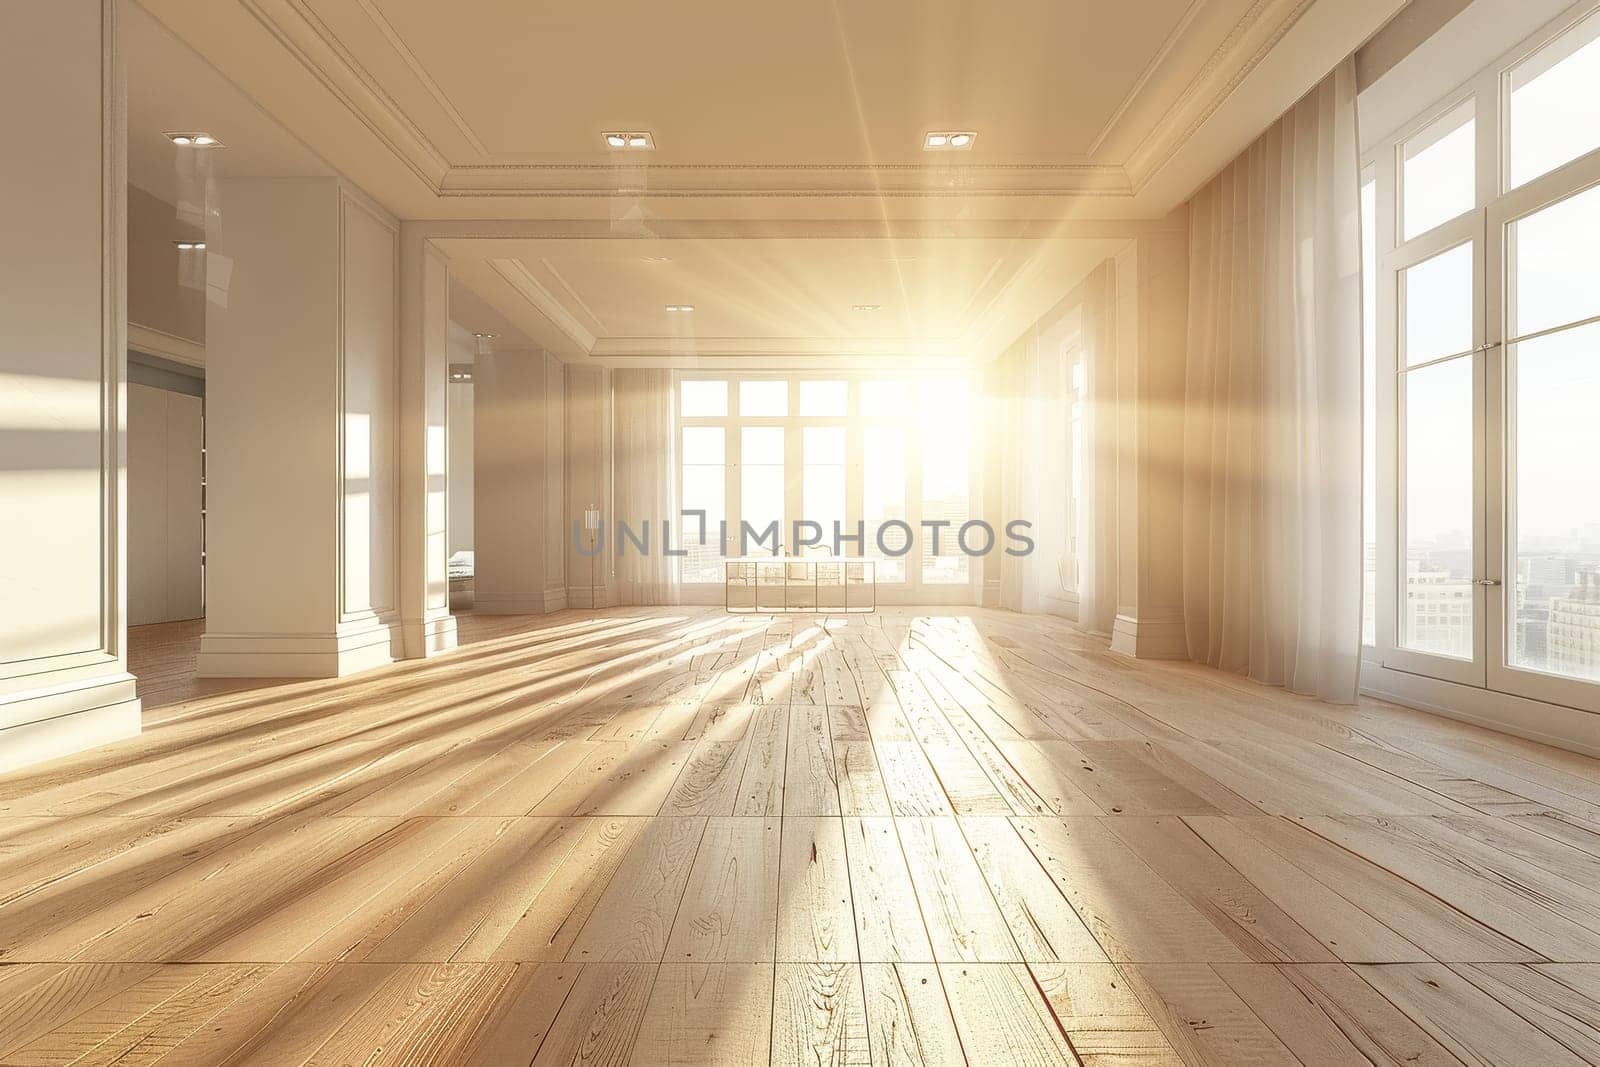 A large open room with a lot of natural light and wooden floors. The room is empty and has a clean, modern look